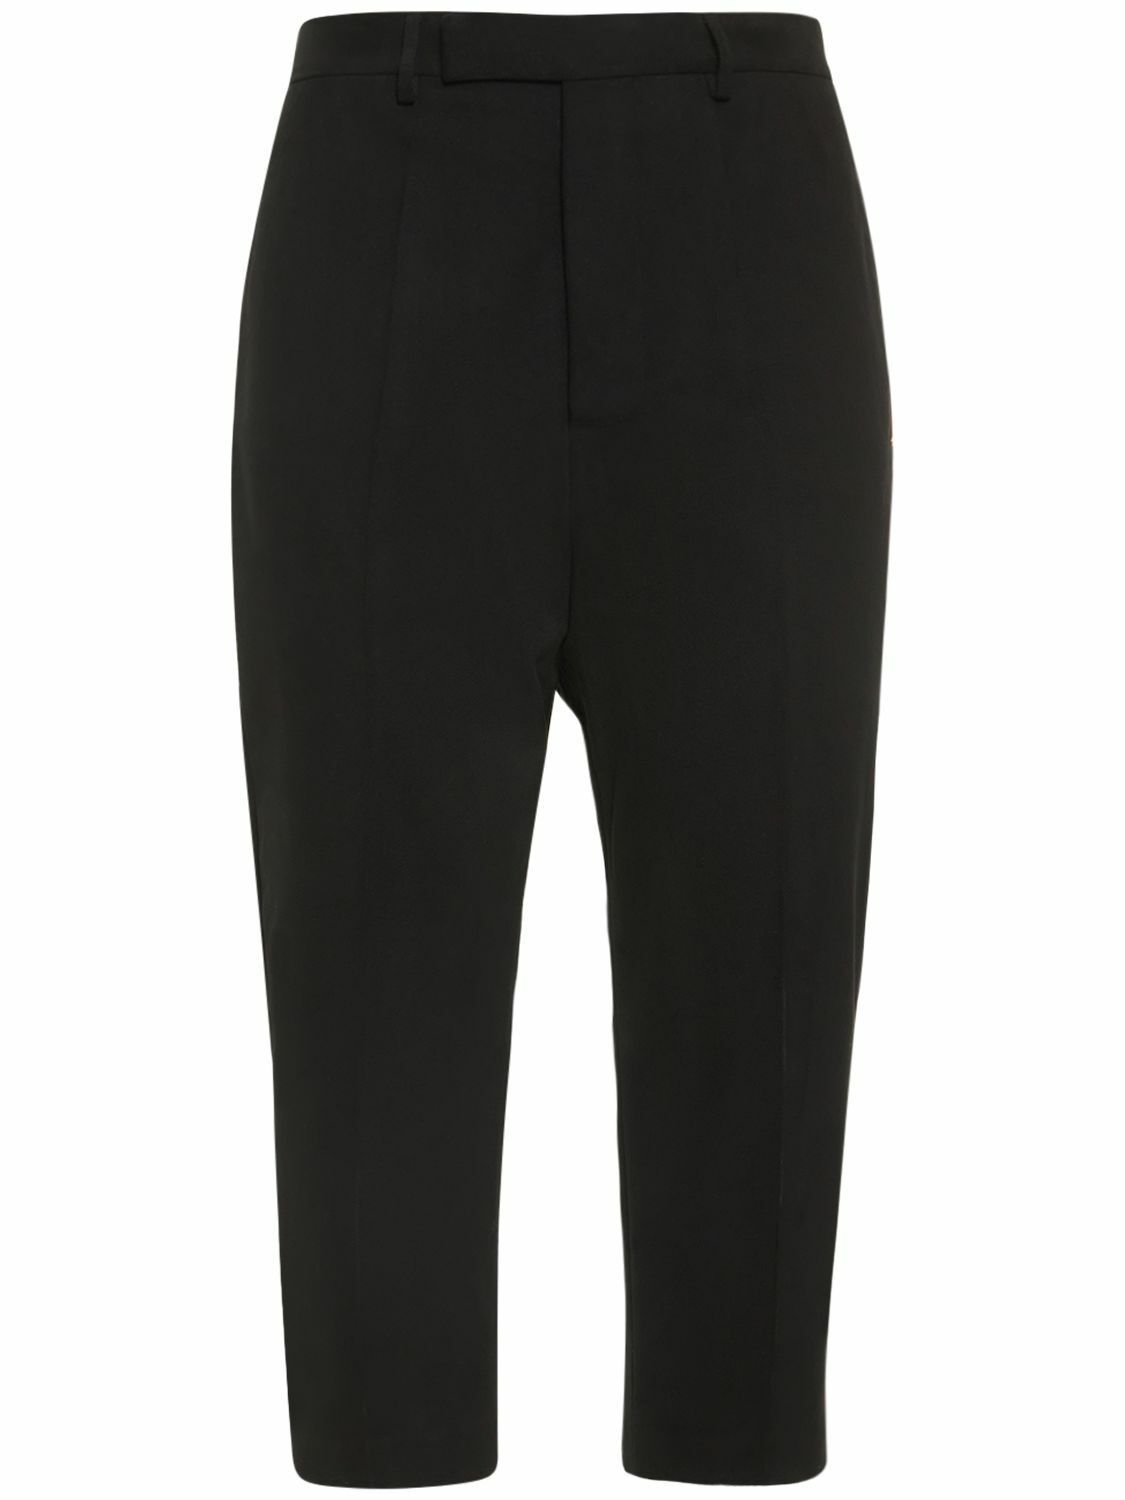 Photo: RICK OWENS - Astaires Stretch Wool Cropped Pants